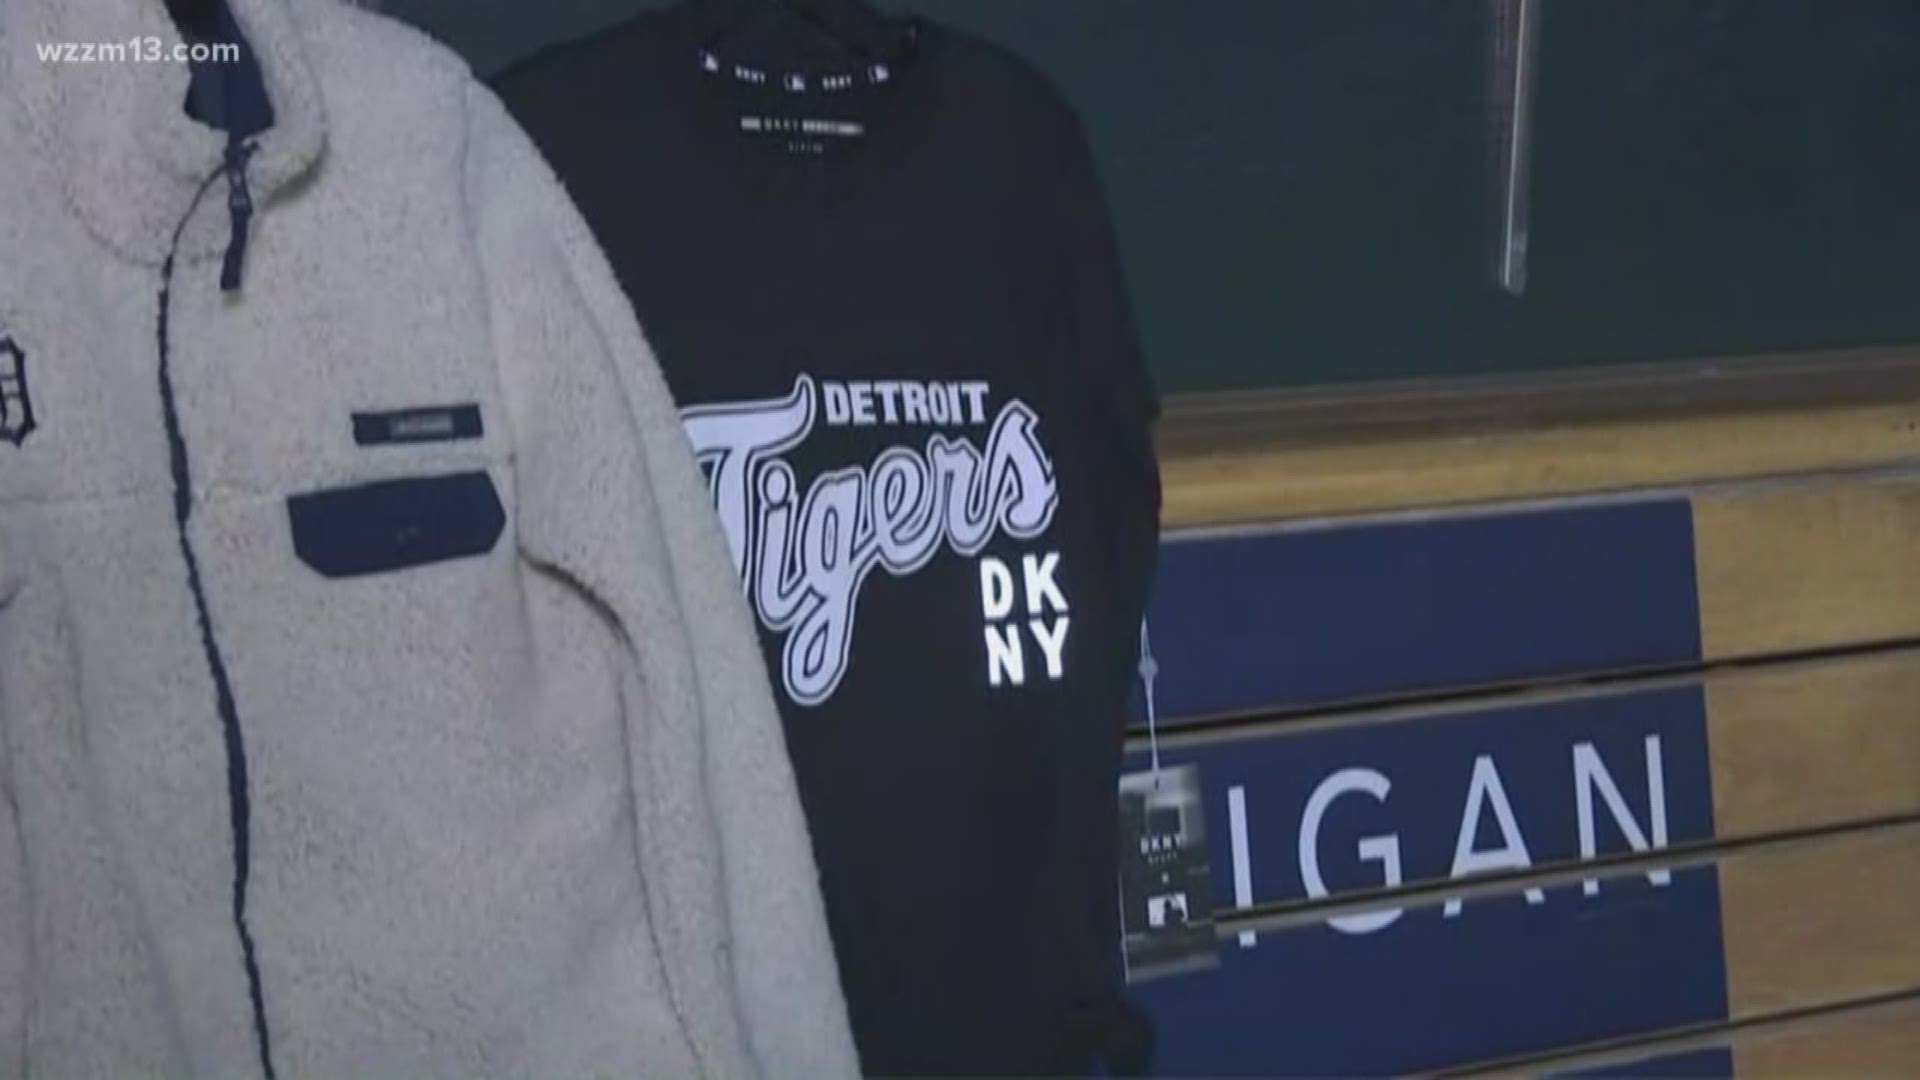 What new Tigers merch you can buy this year